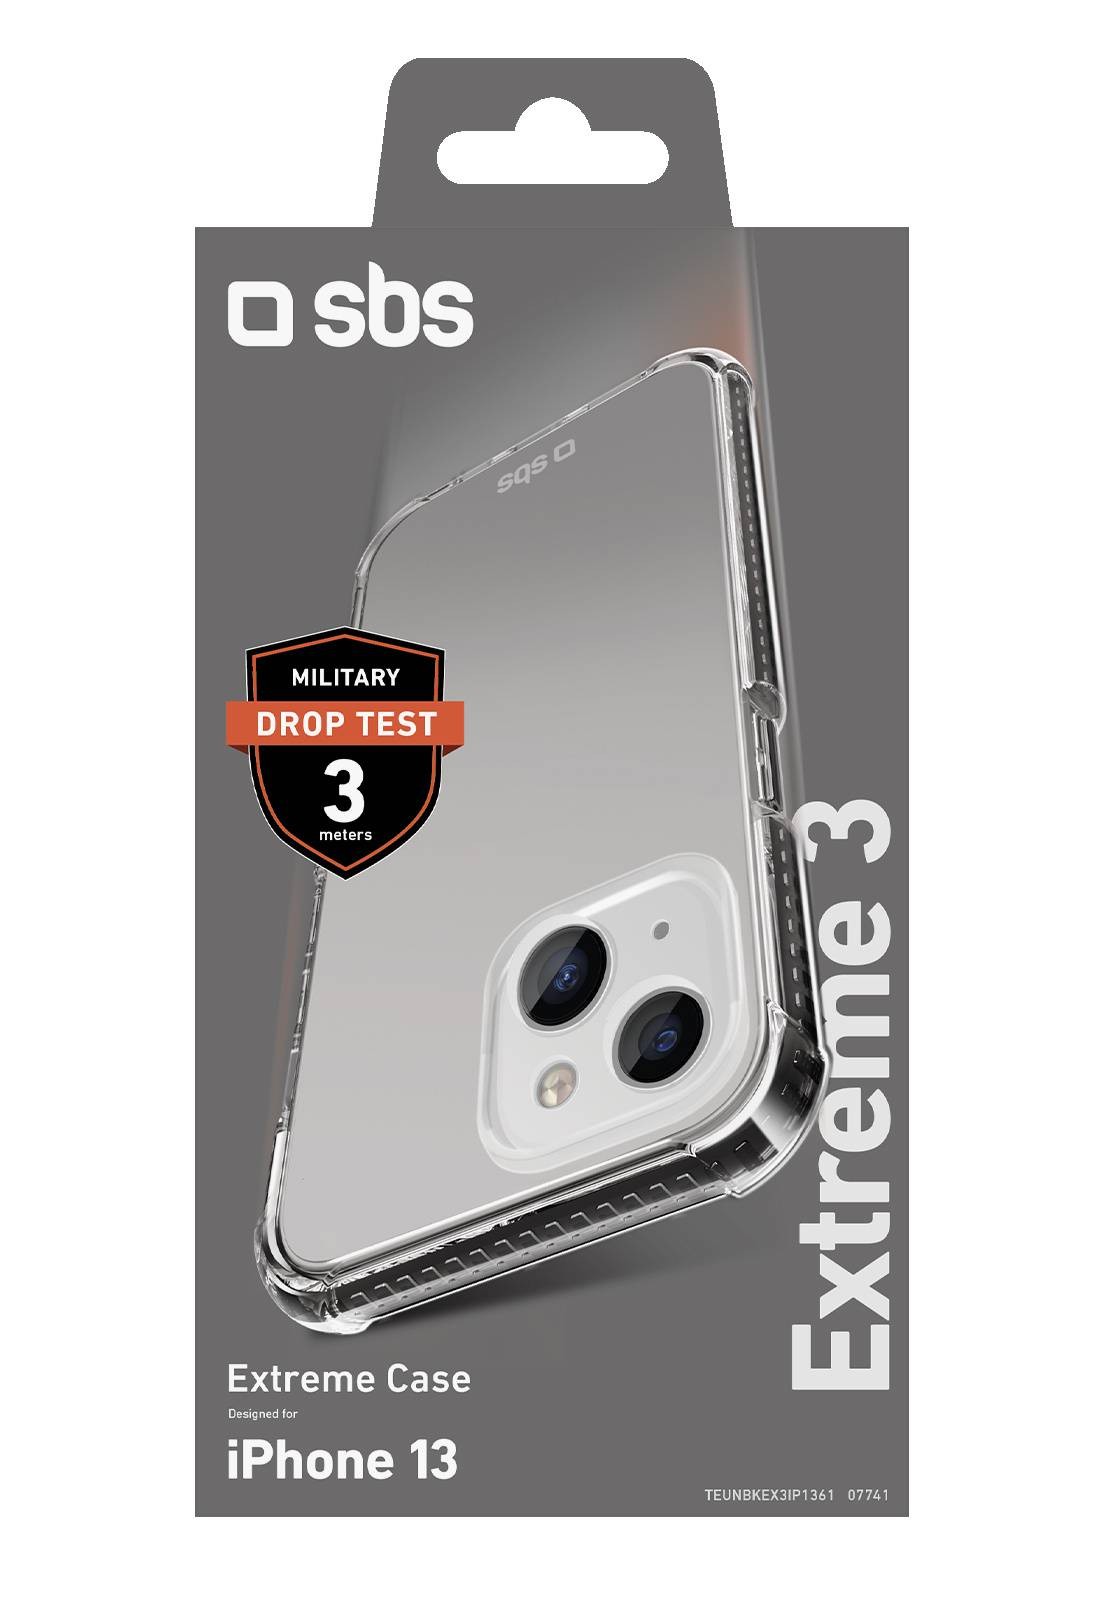 SBS Coque iPhone  Extreme X3 pour iPhone 13 - COQ-EXTRX3-IPHONE13